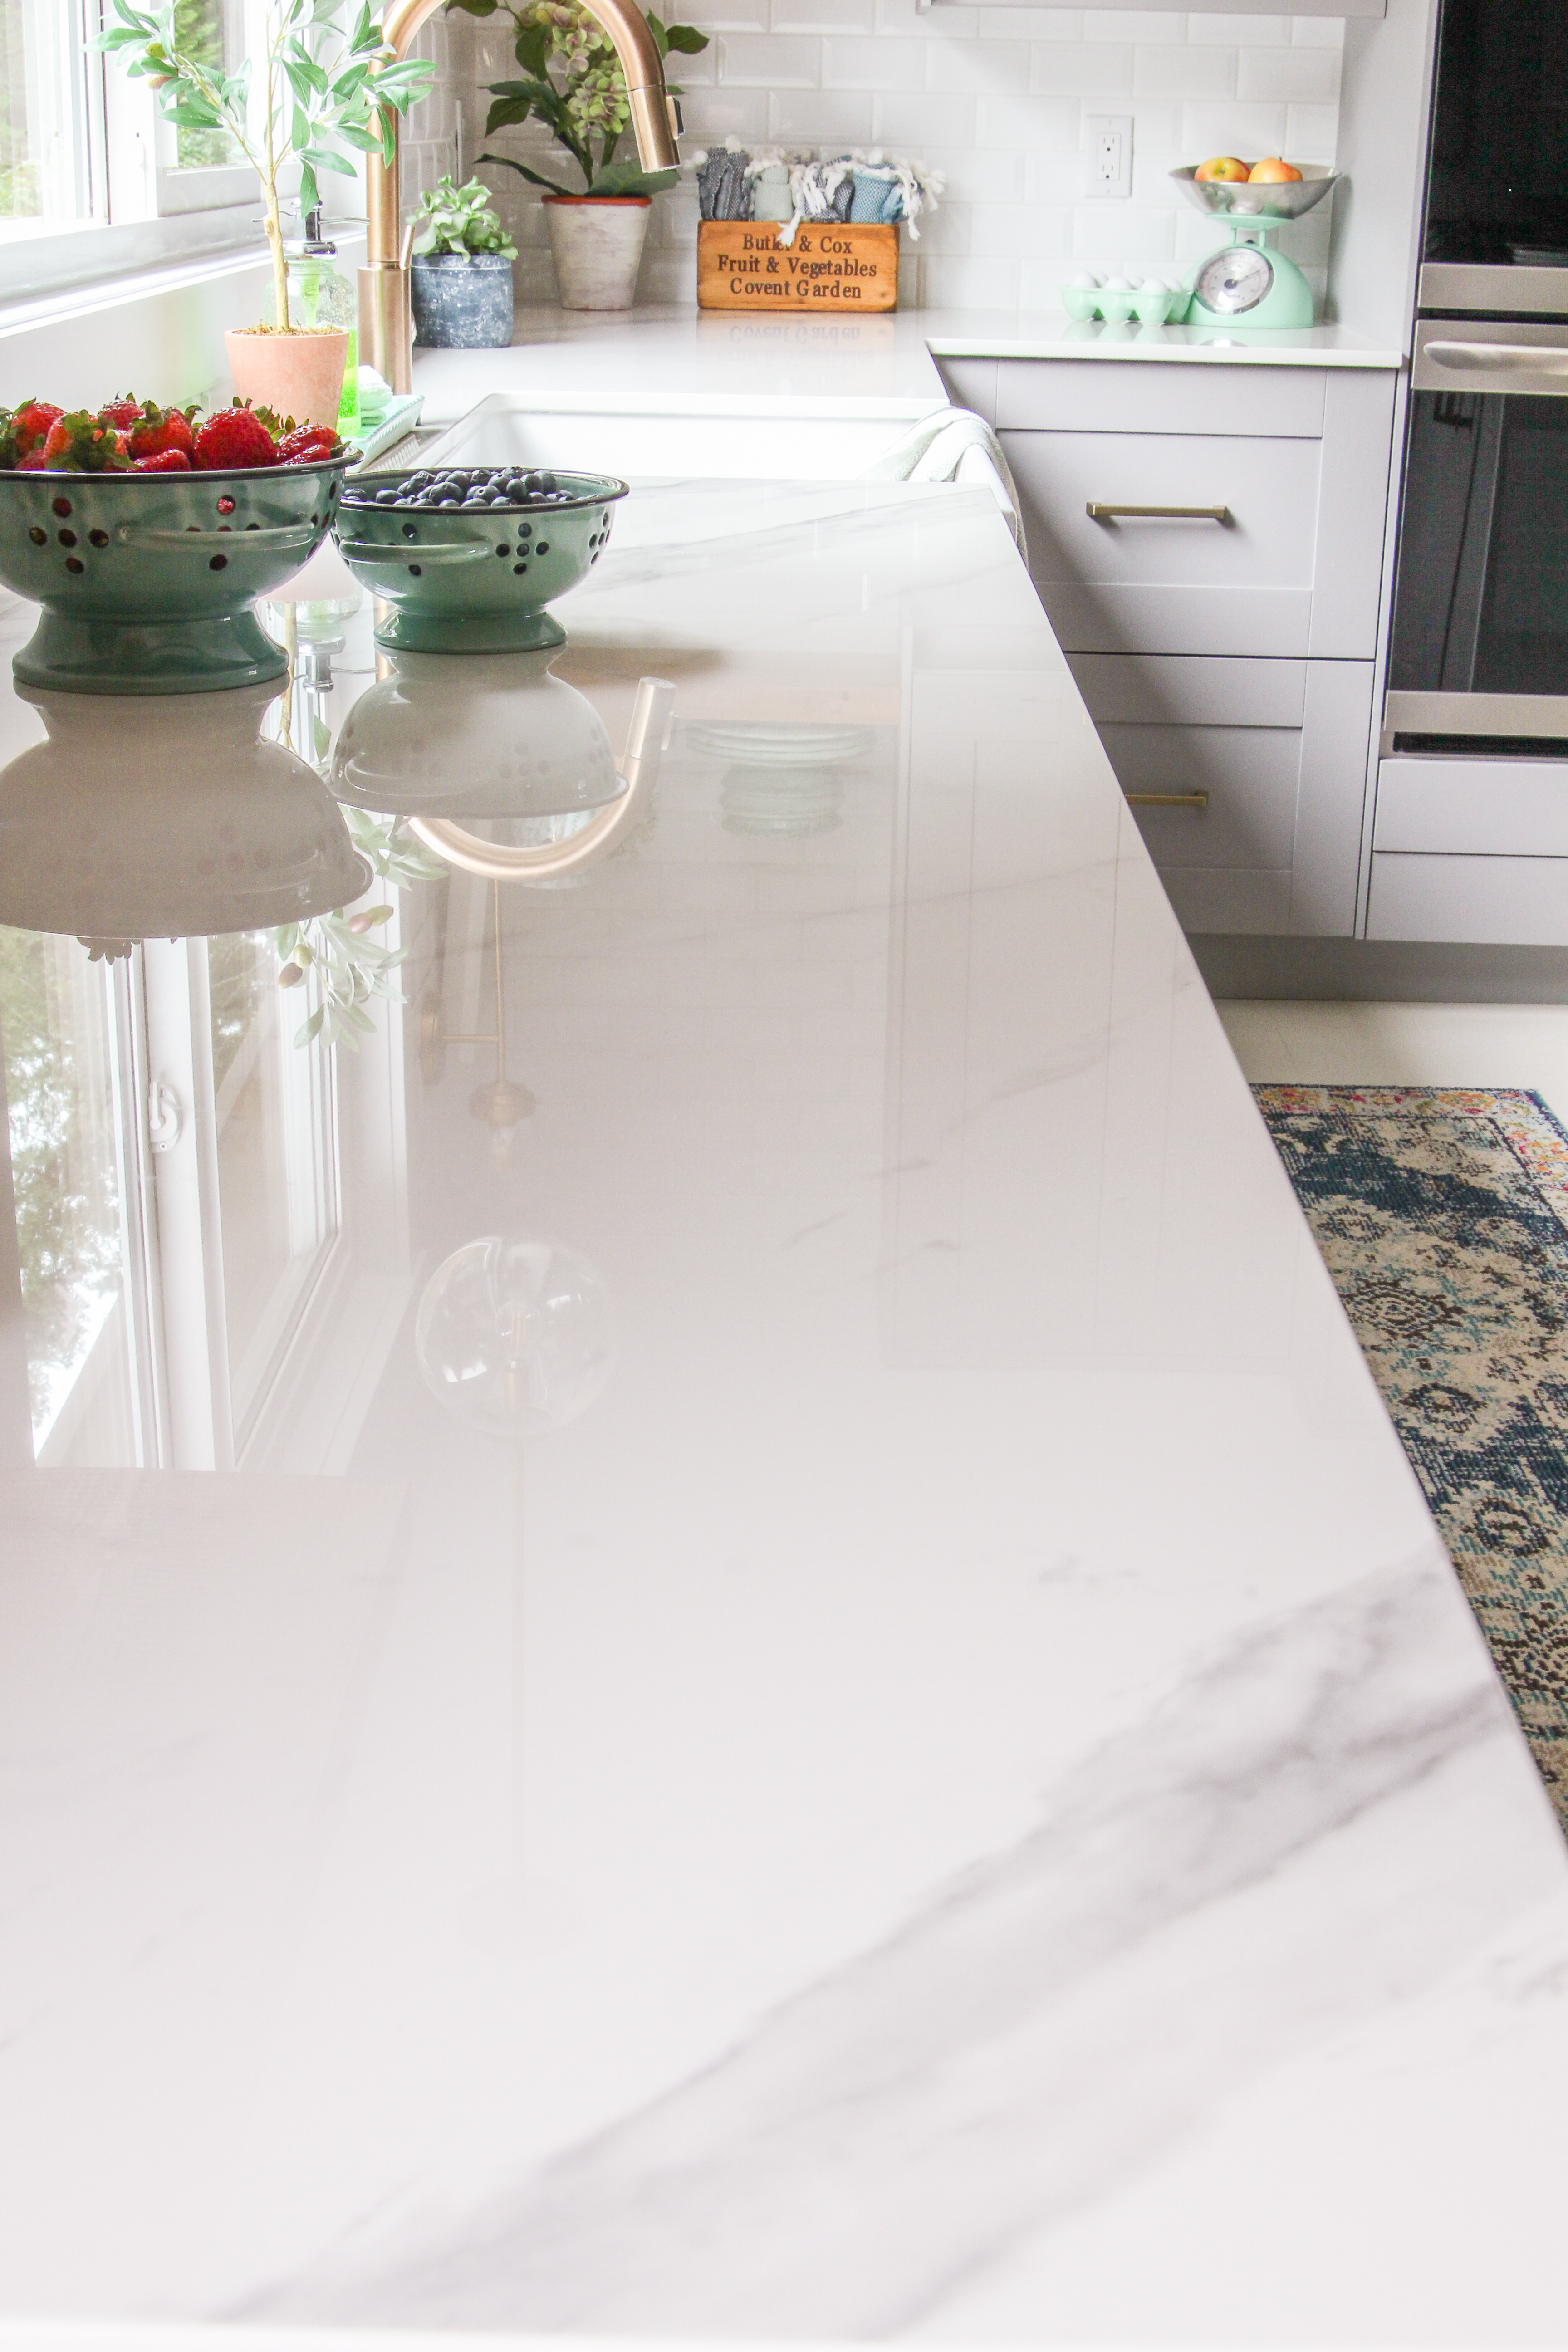 Solid Surface Countertop Options Pros, Why Solid Surface Countertops